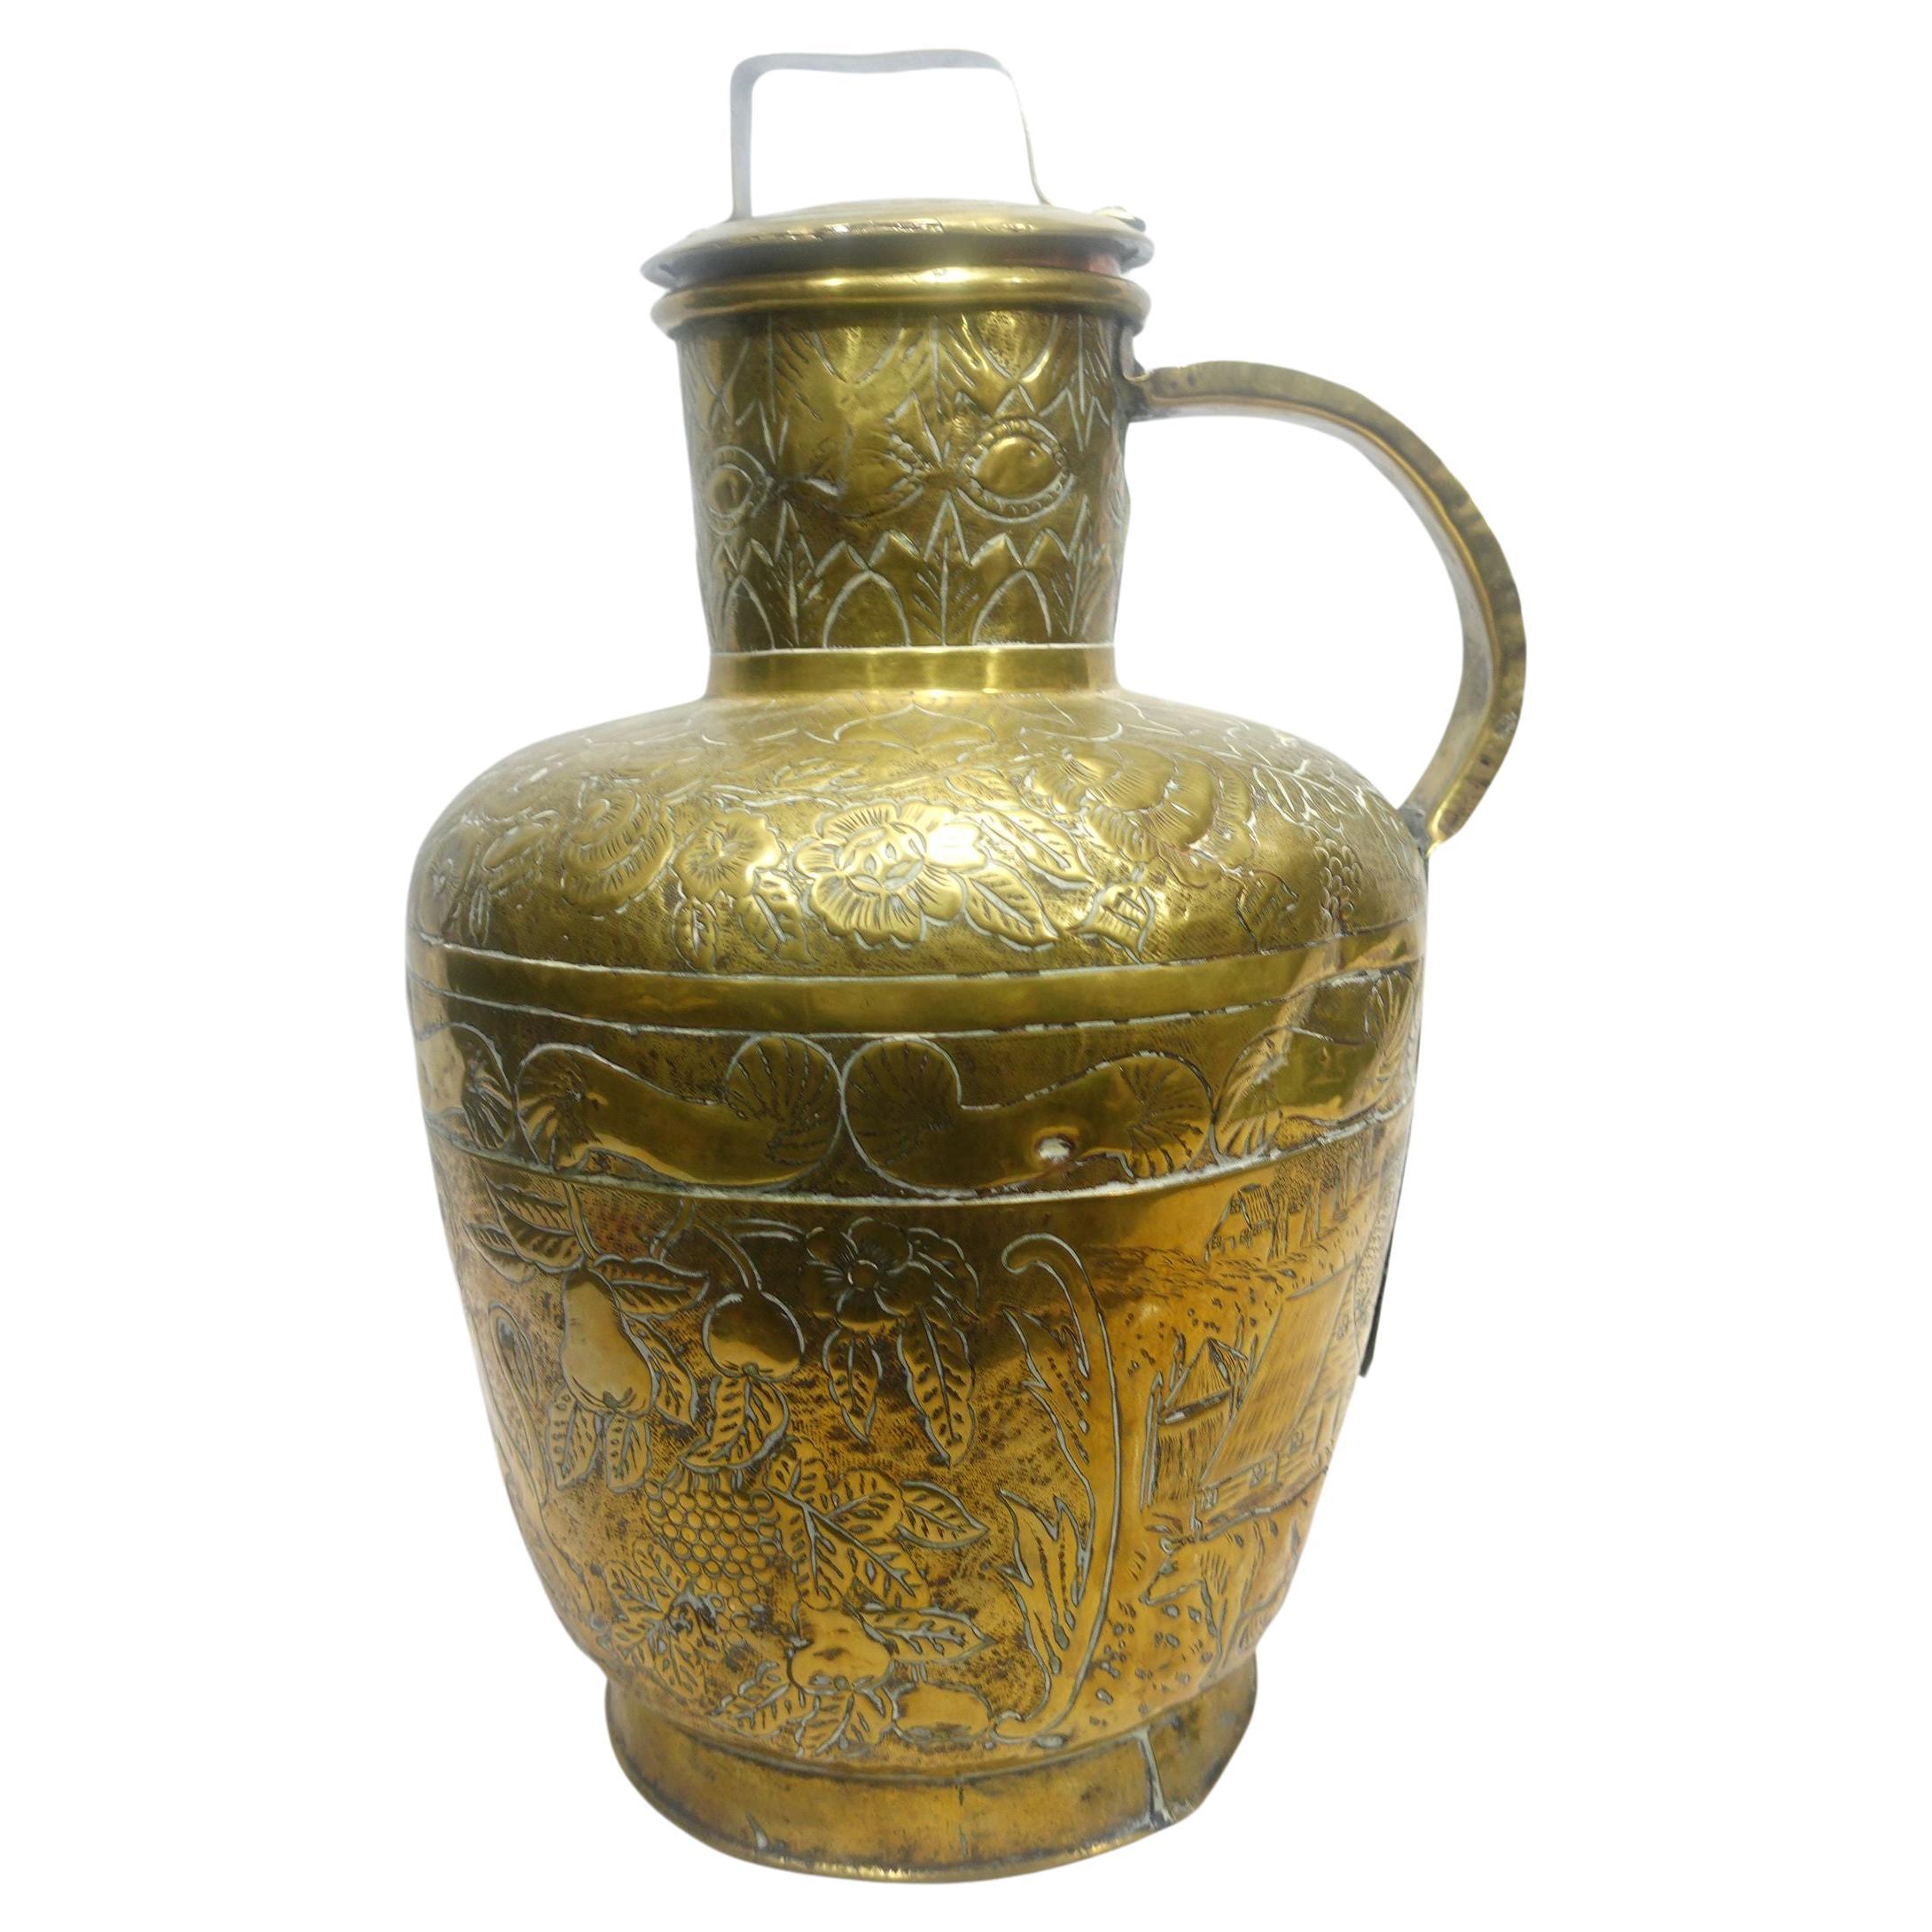 Antique Large Heavily Embossed French Brass Jar w/Cover 18th Century (10-BJ) For Sale